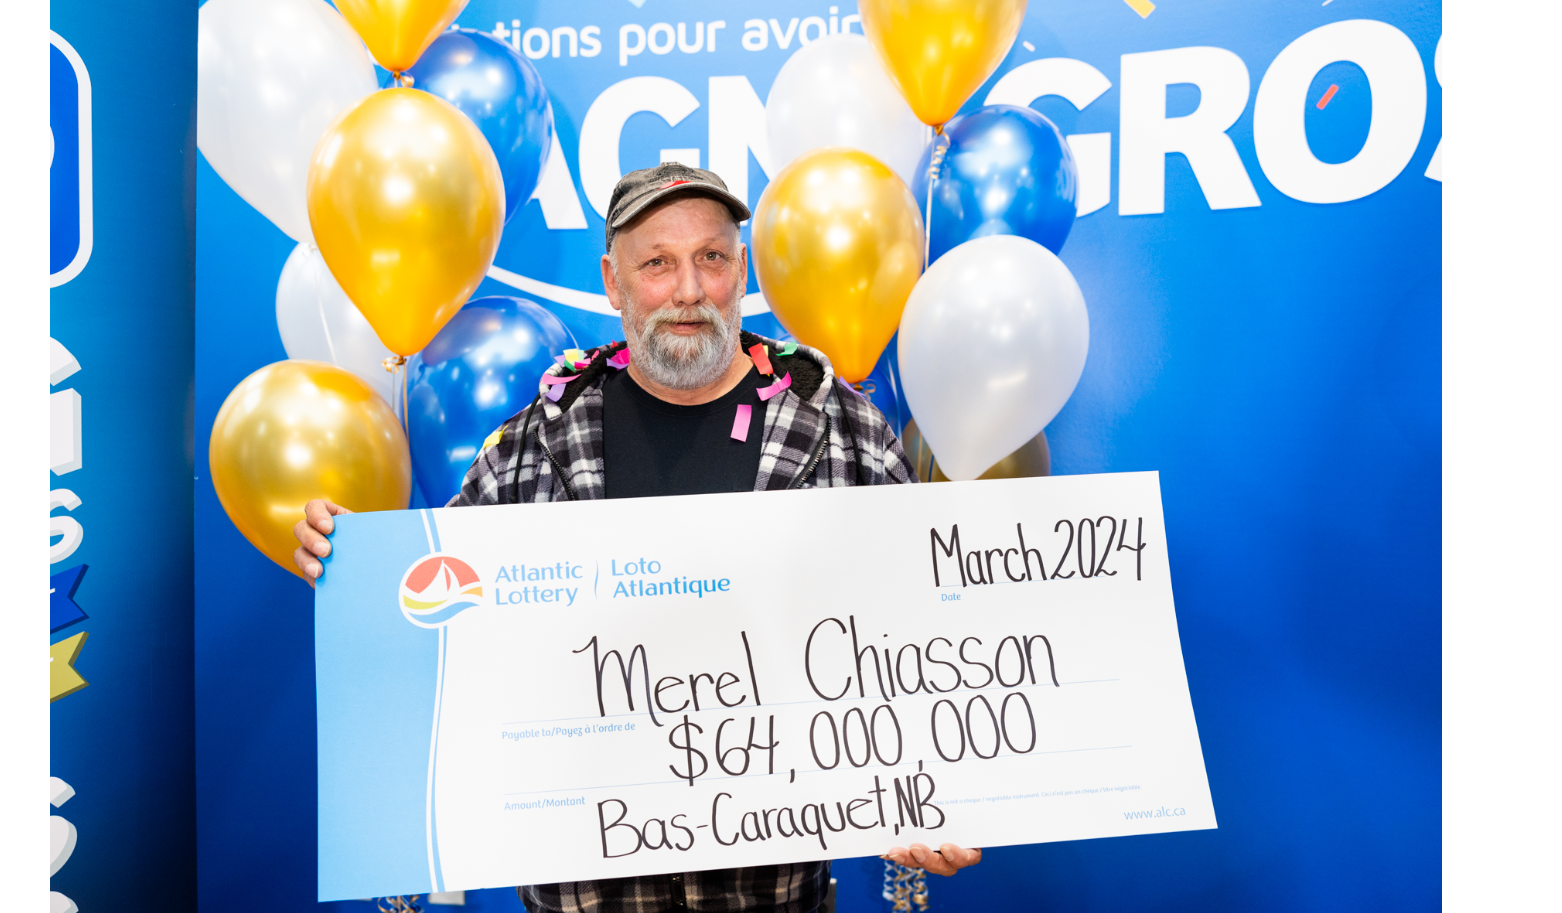 Cutting it close: N.B. man claims $64M lotto win just 19 days before
expiry